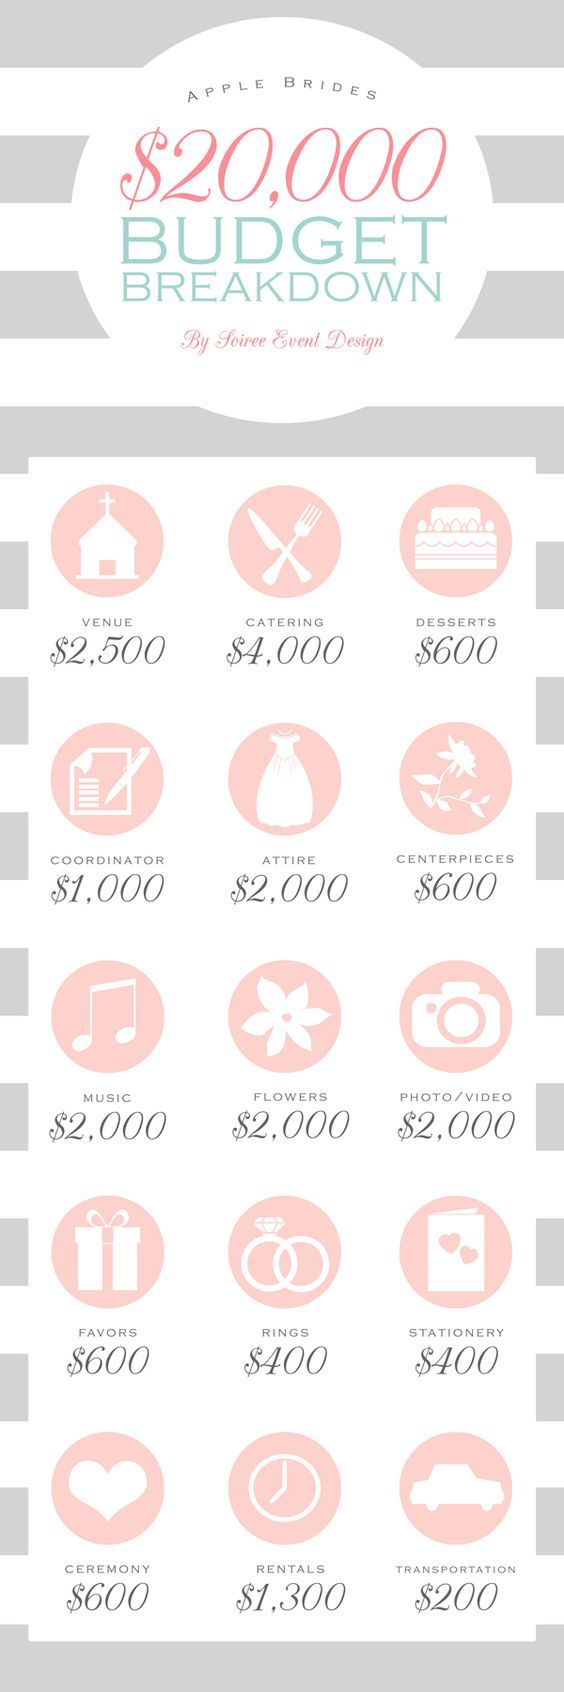 Mariage - Budget Breakdown For A $20,000 Wedding